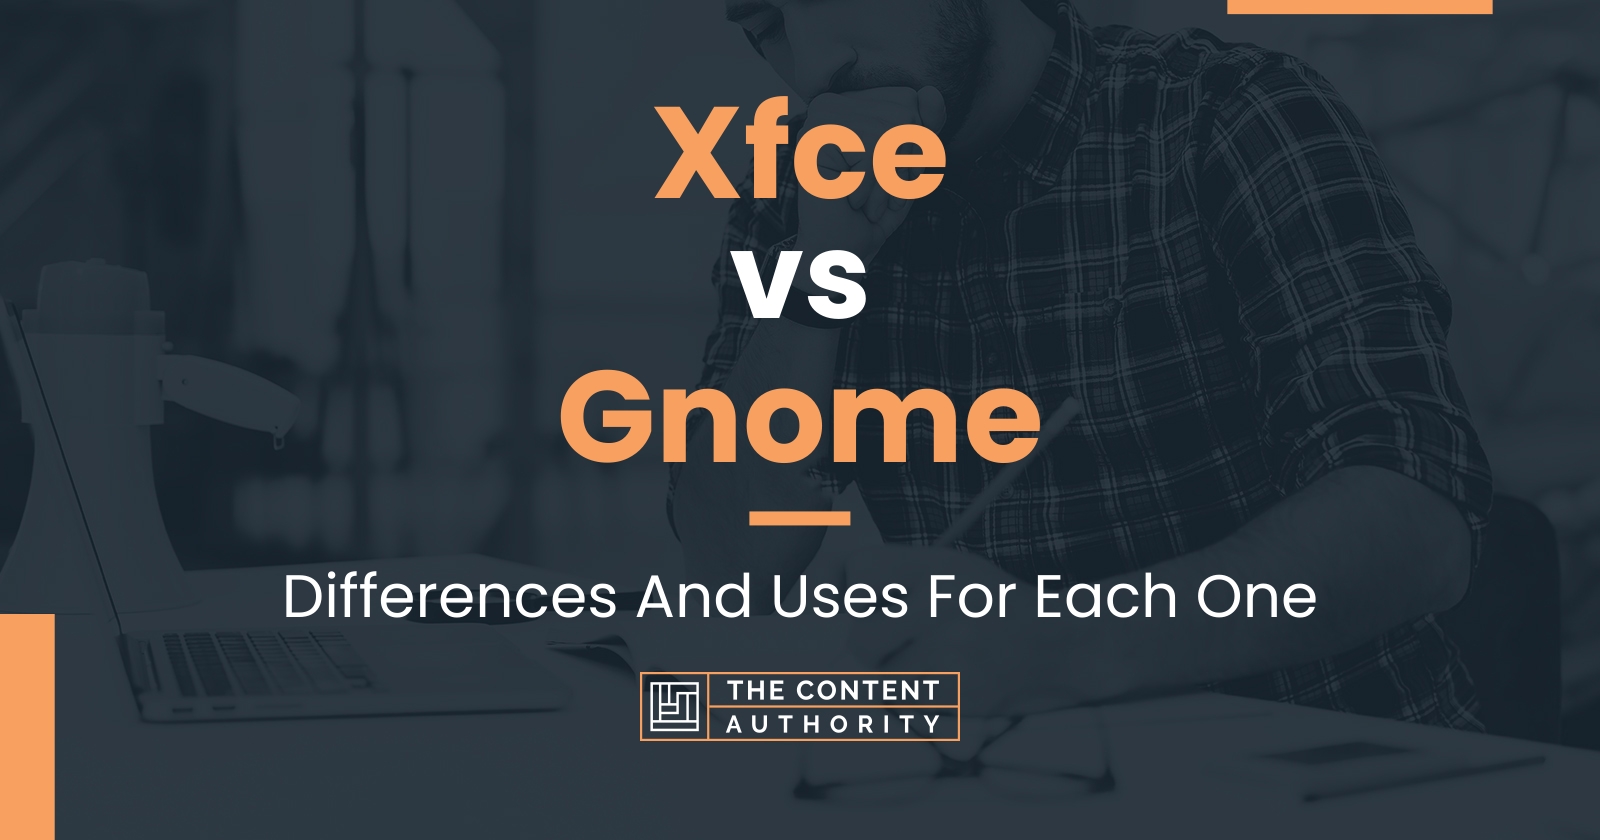 Xfce vs Gnome: Differences And Uses For Each One